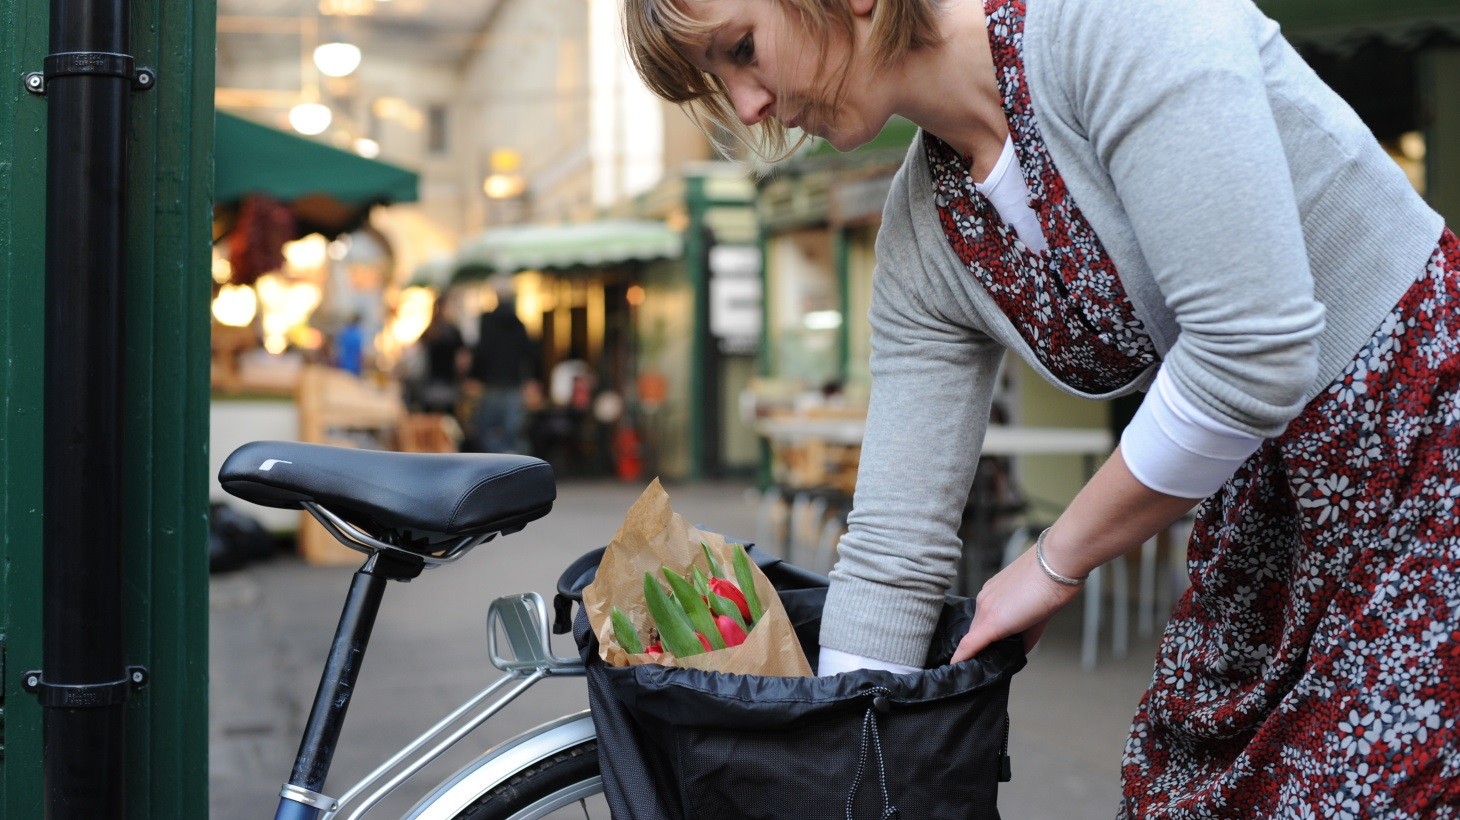 How to your shopping bike - Sustrans.org.uk